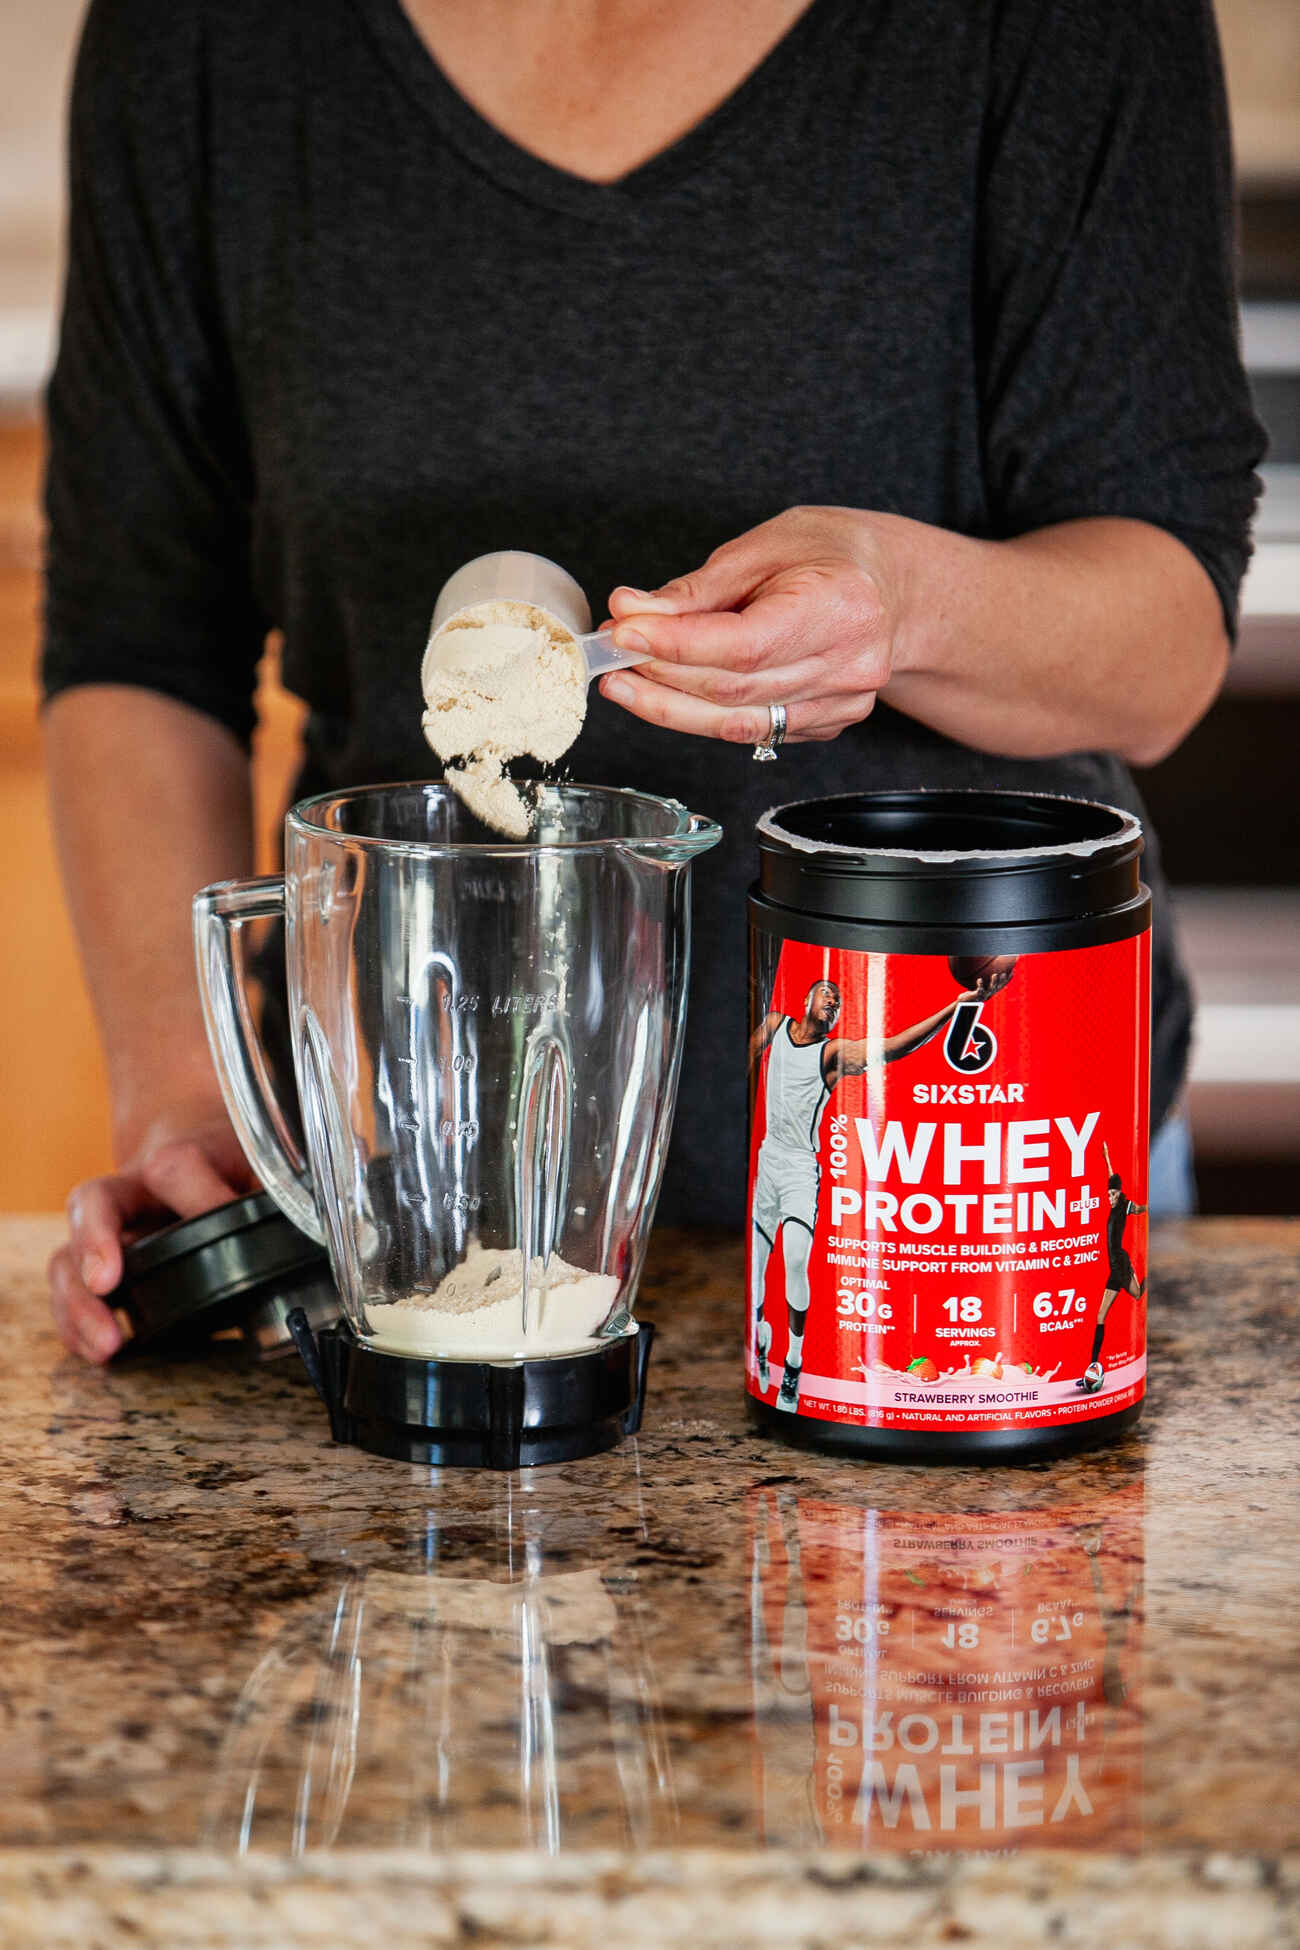 A woman adding whey protein to blender for shake preparation